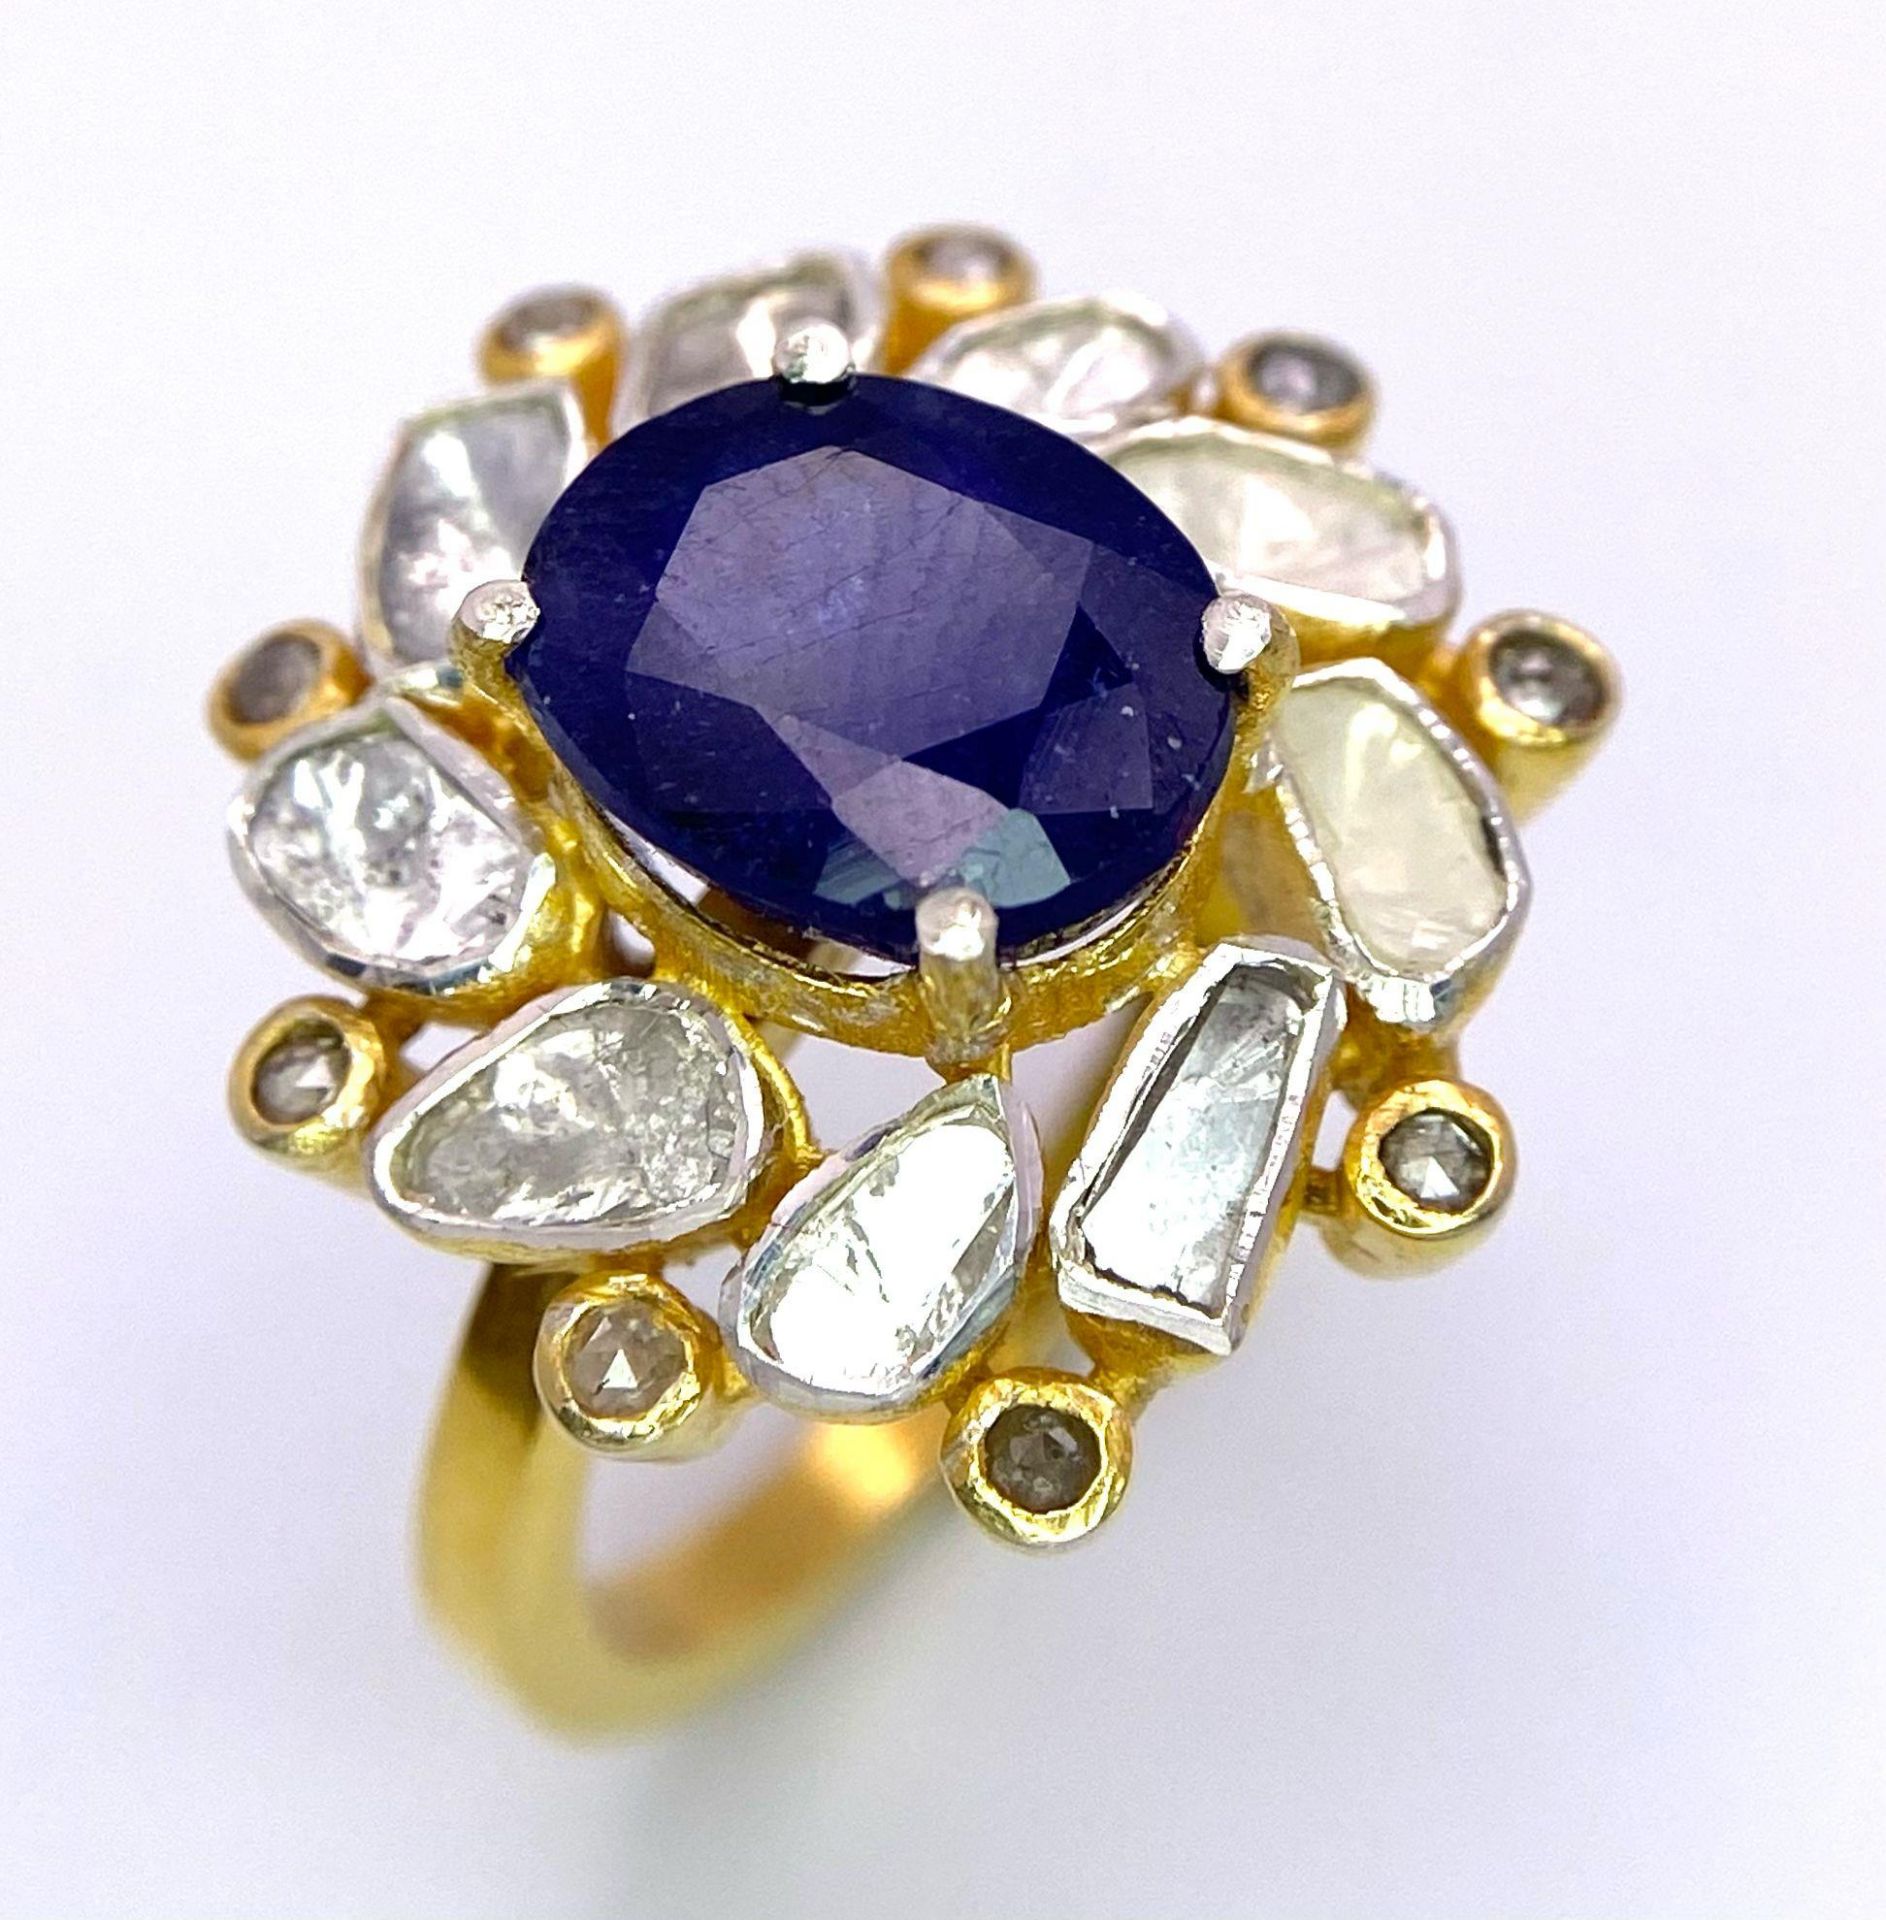 An eye-catching silver and gold ring with an oval cut blue sapphire surrounded by a group of large